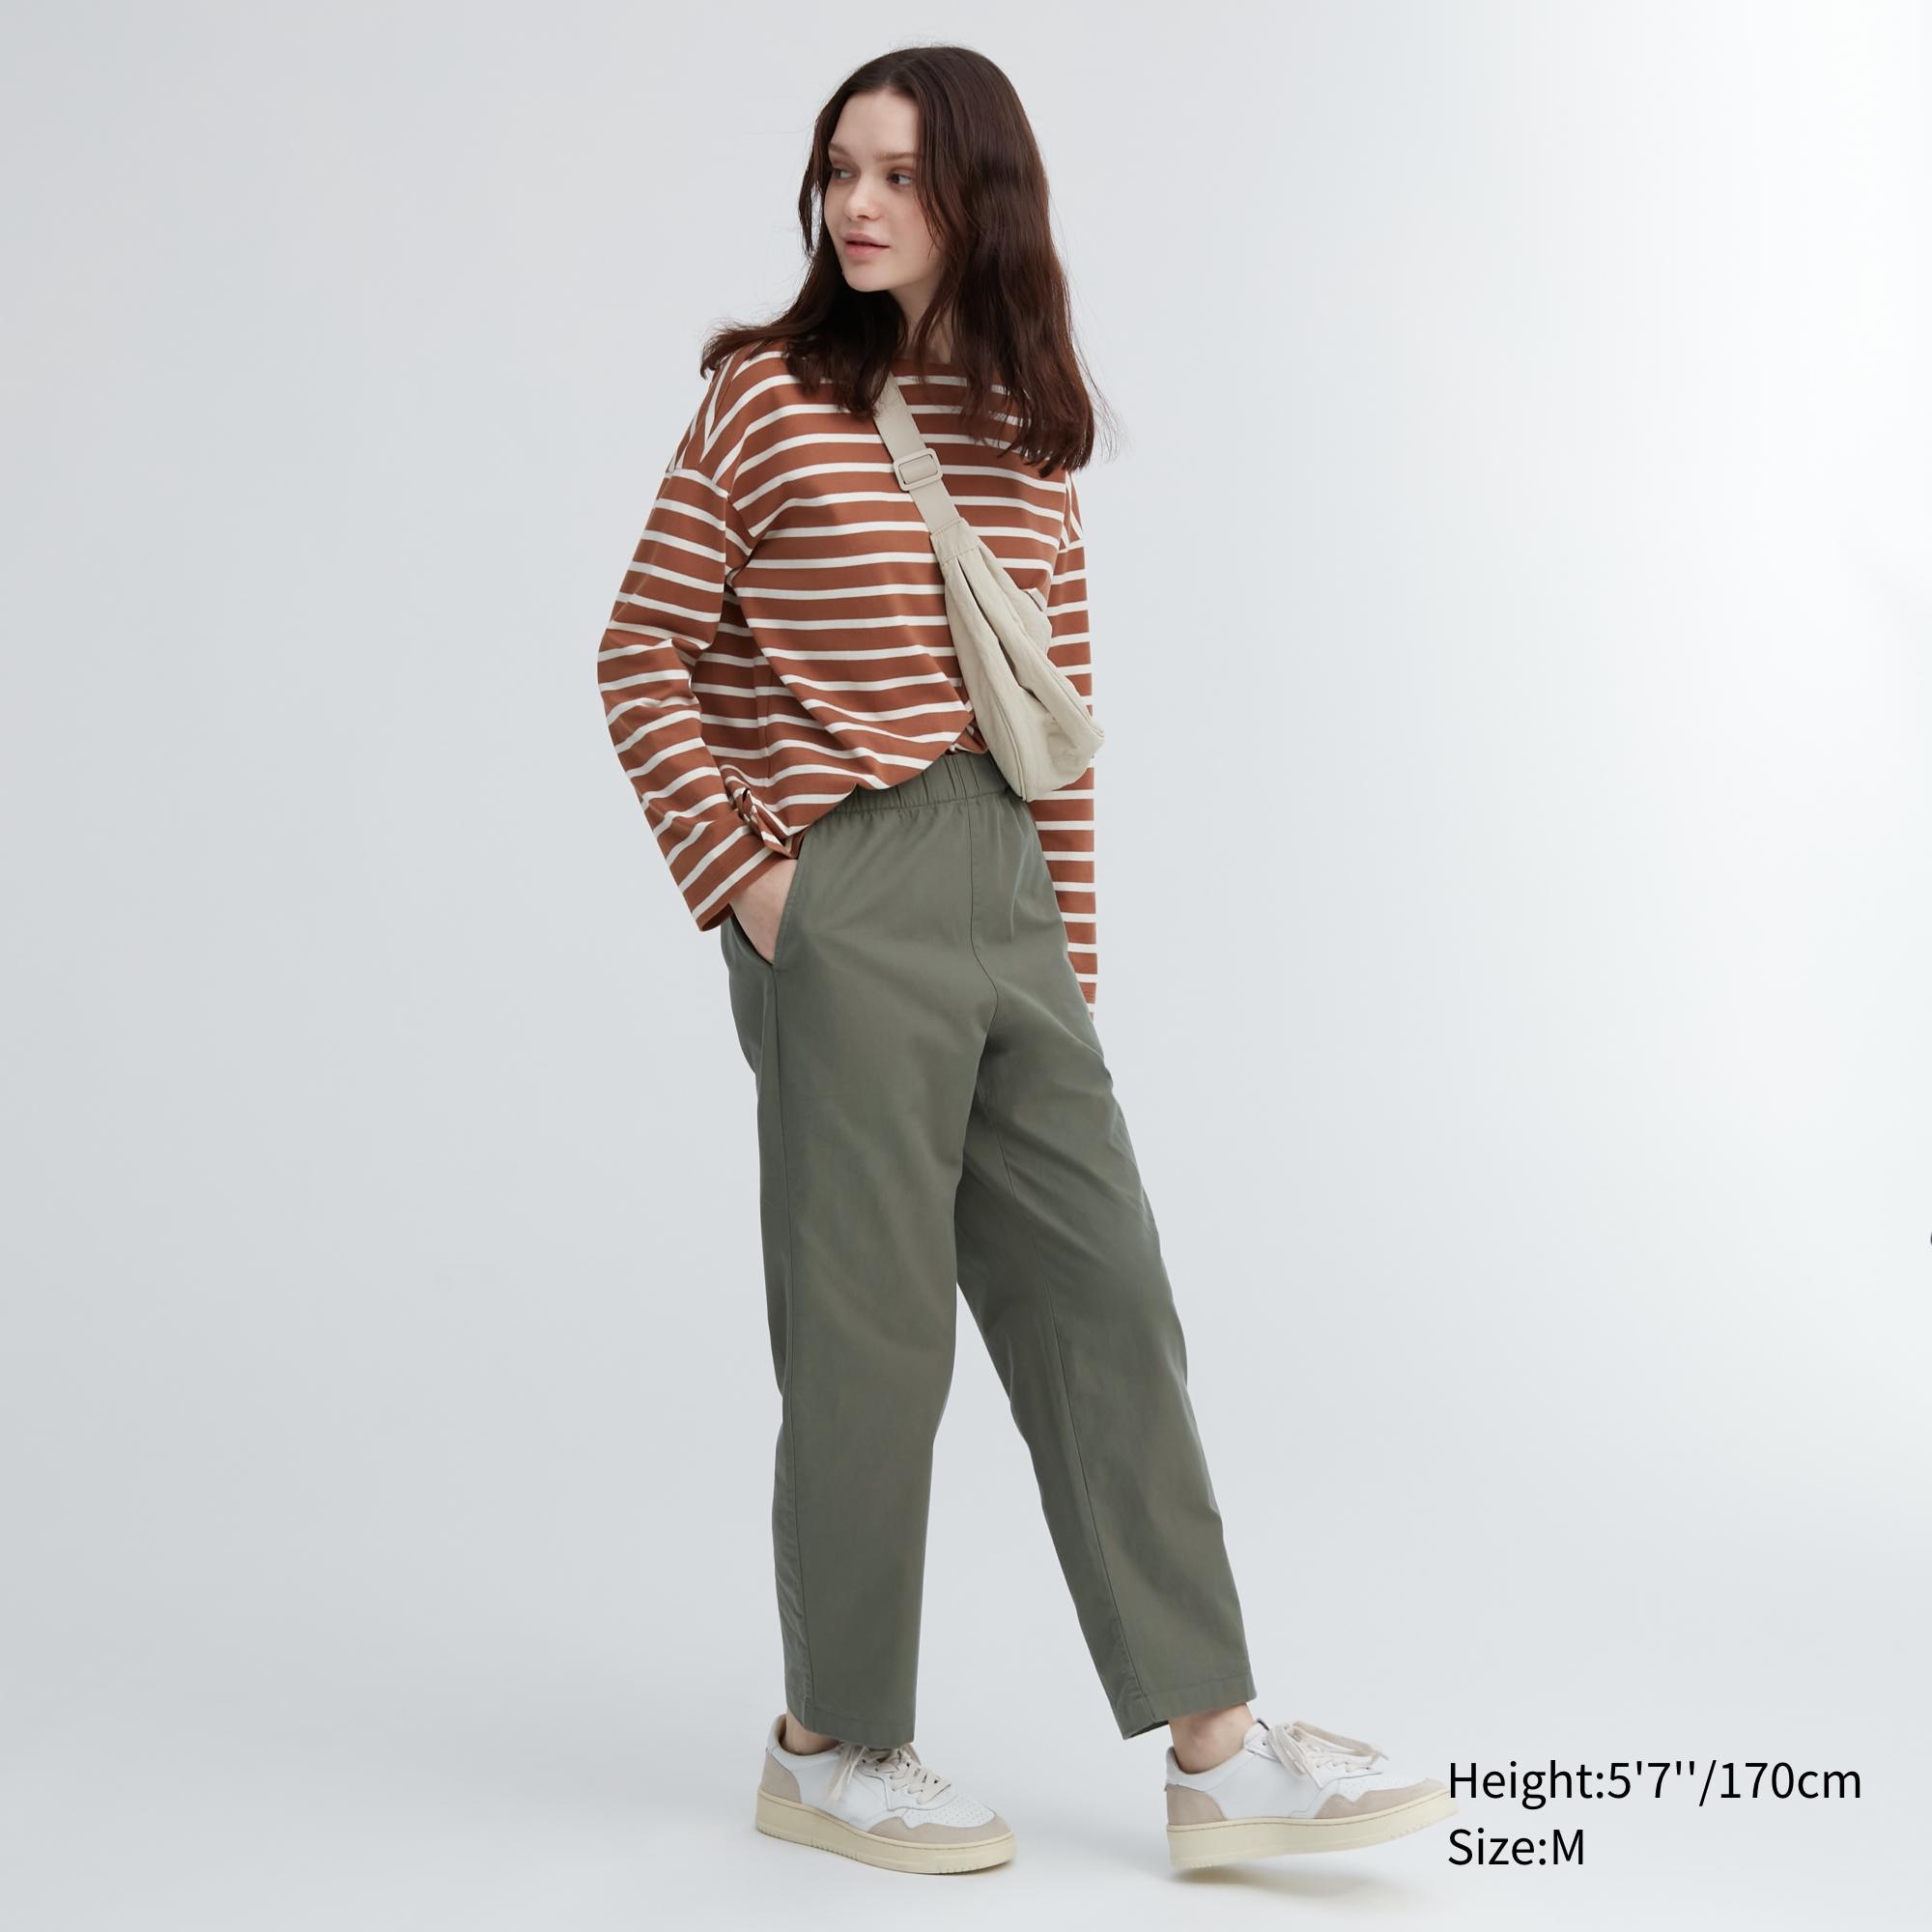 Buy Beigecoloured Anklelength Trousers Online  W for Woman